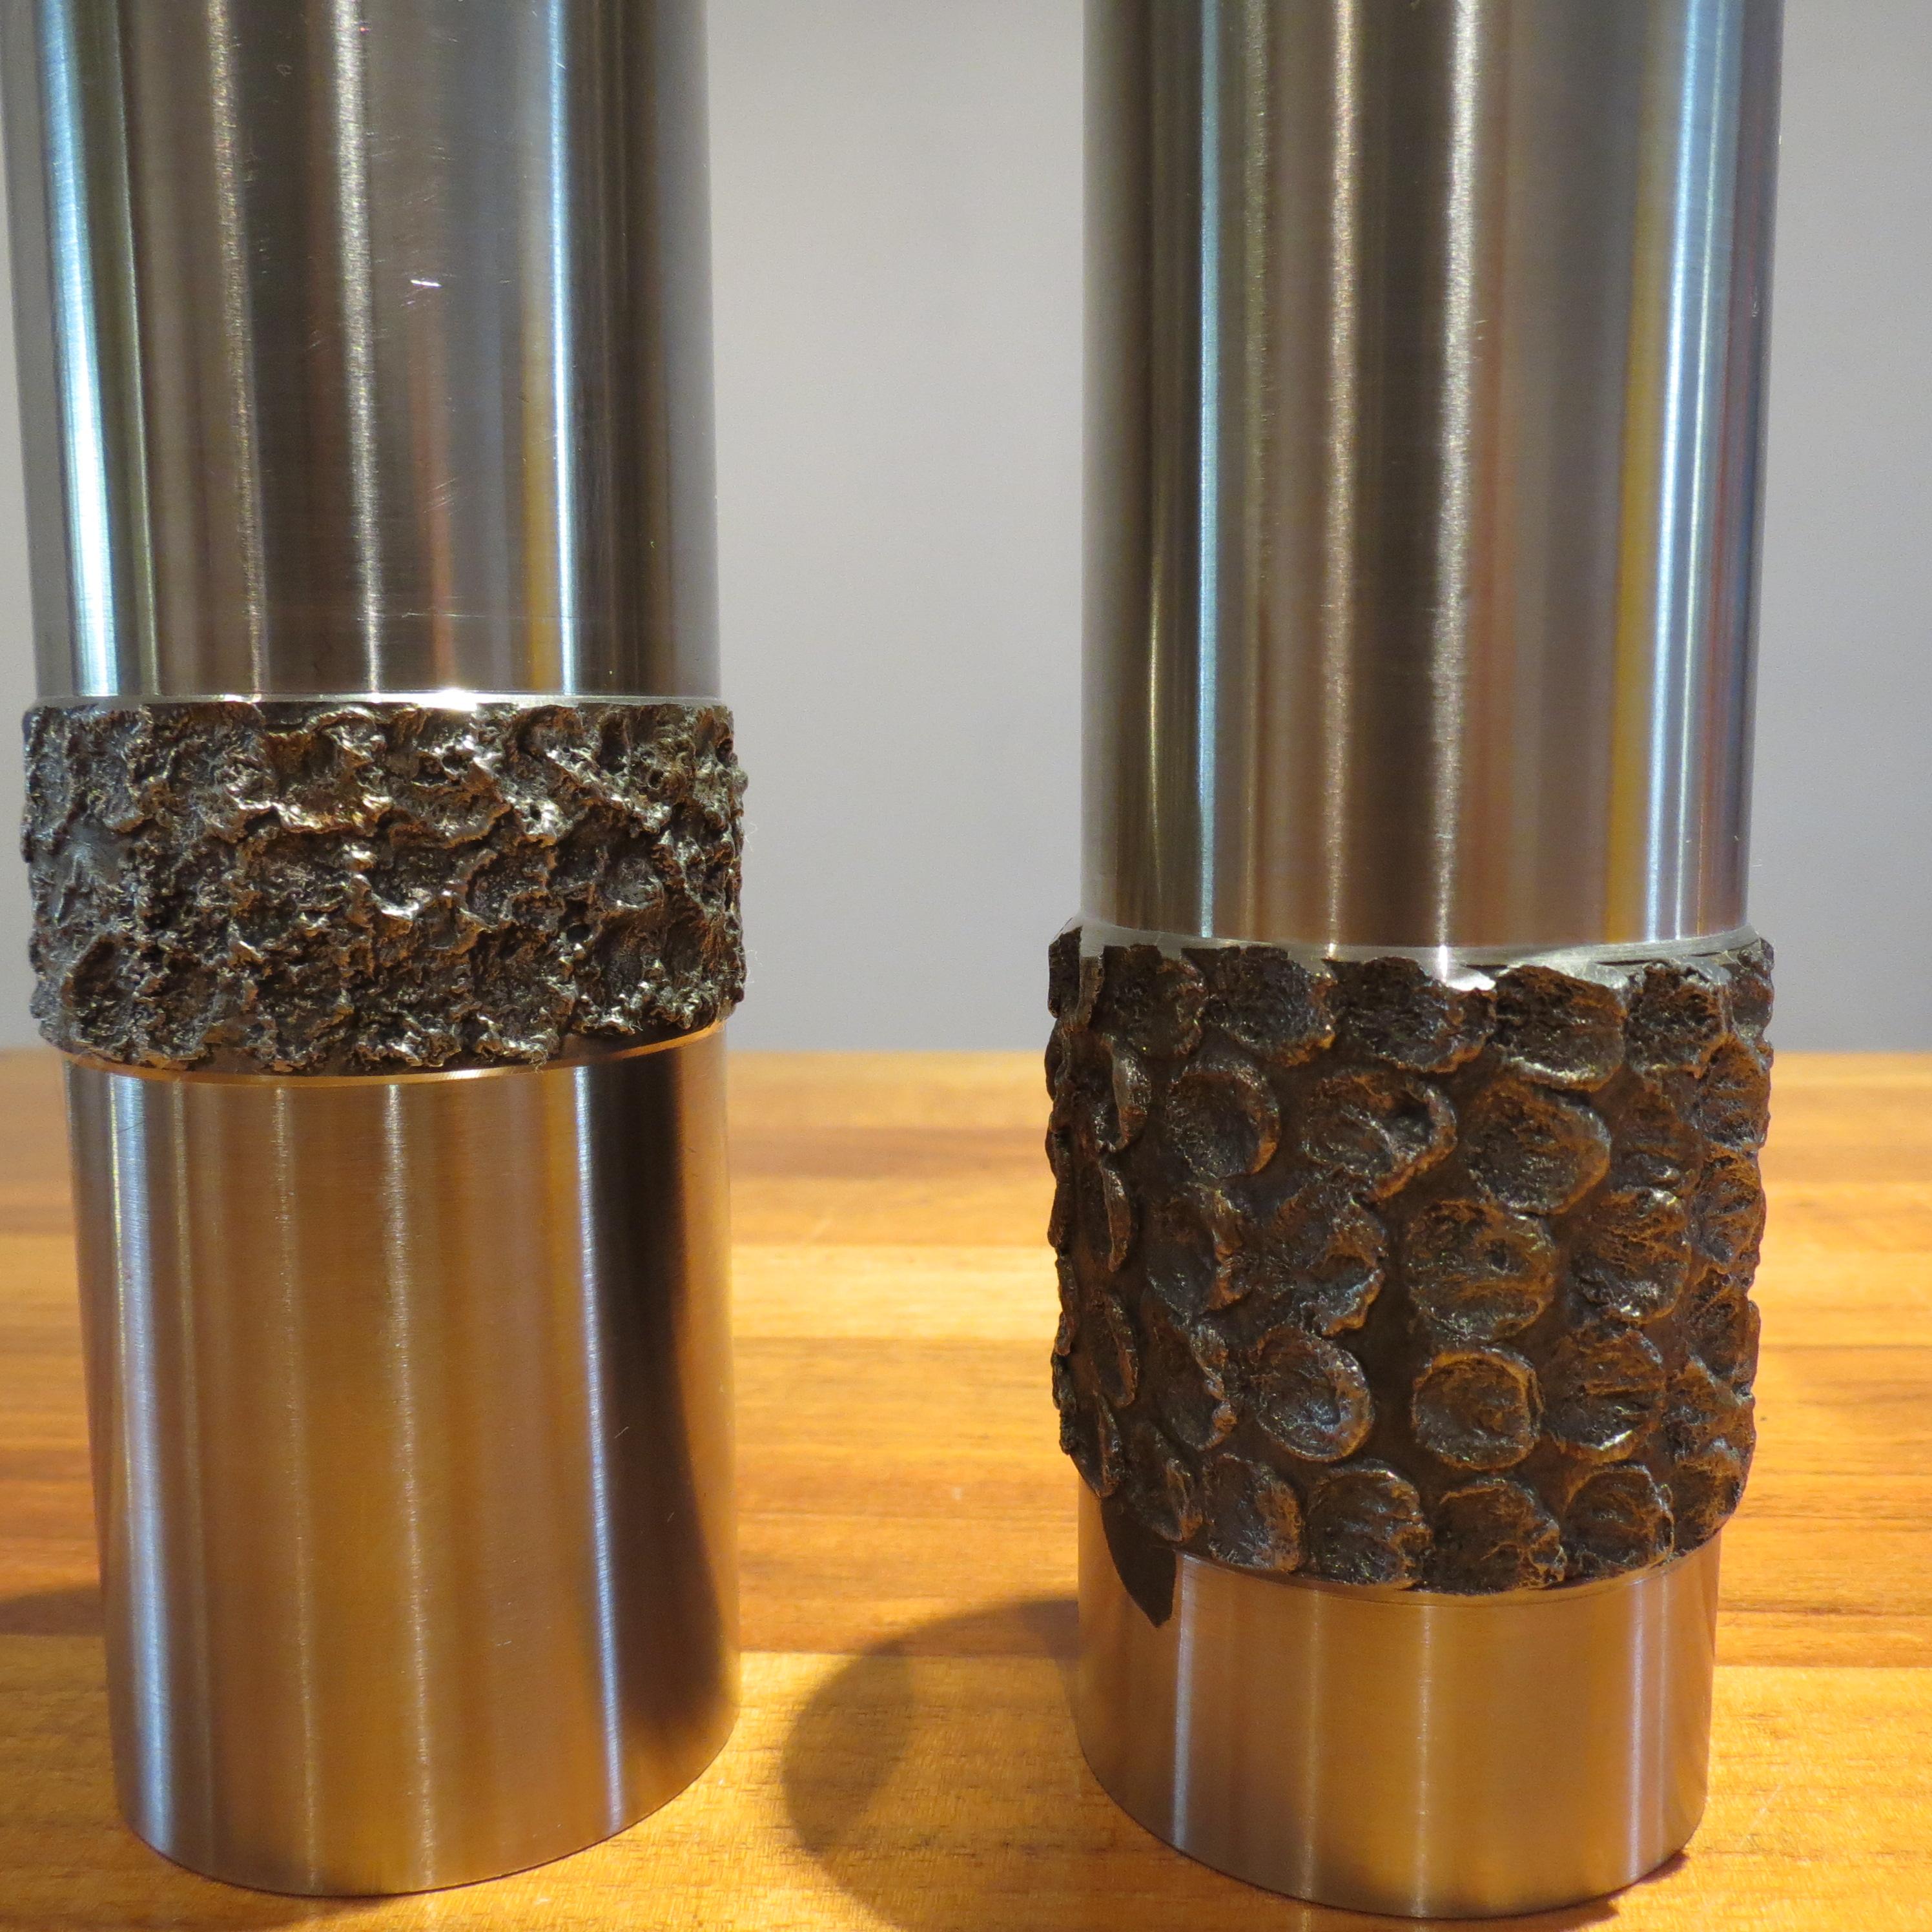 Pair of stainless steel vases in Brutalist form from the 1970s.
Hand produced in Germany, turned stainless steel with decorative pattern. Very much in the style of Stuart Devlin. Heavy good quality piece, could also be used as candleholders. 
